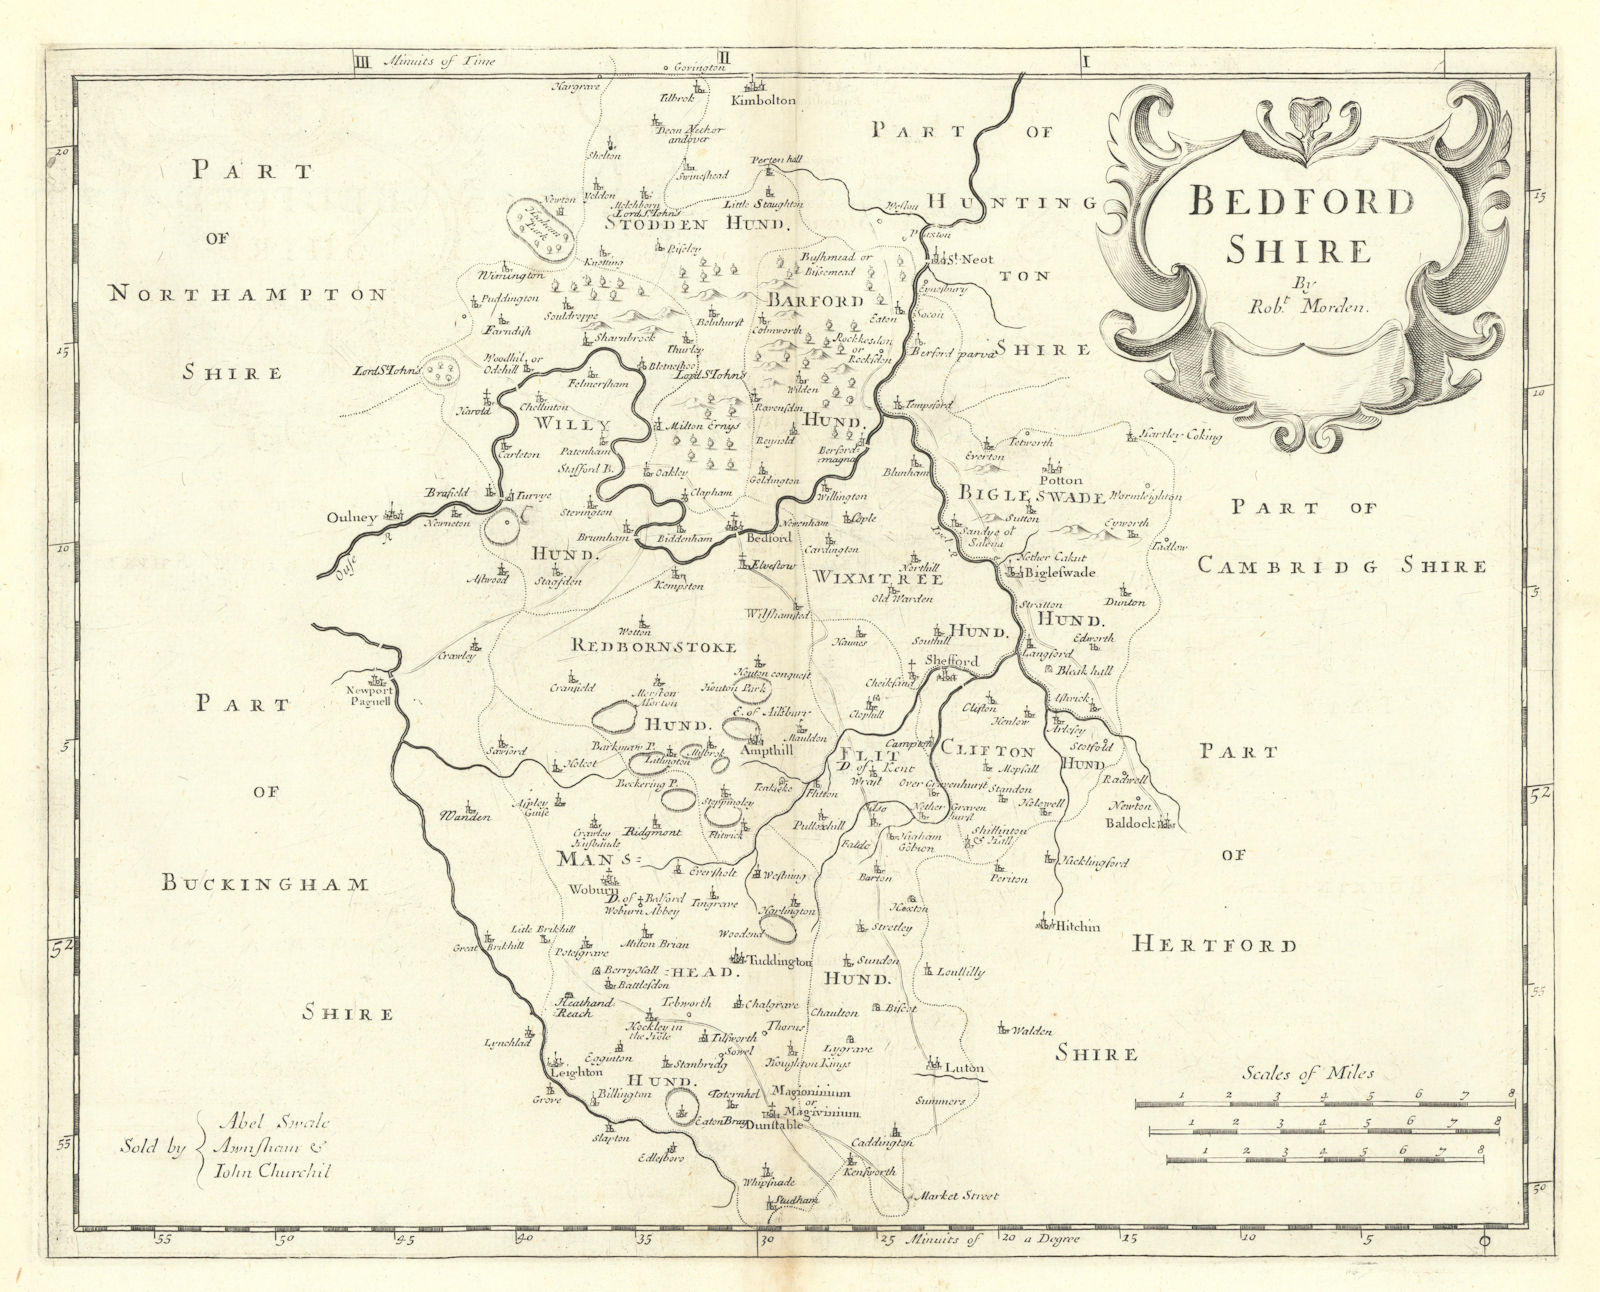 Associate Product Bedfordshire. 'BEDFORD SHIRE' by ROBERT MORDEN from Camden's Britannia 1722 map